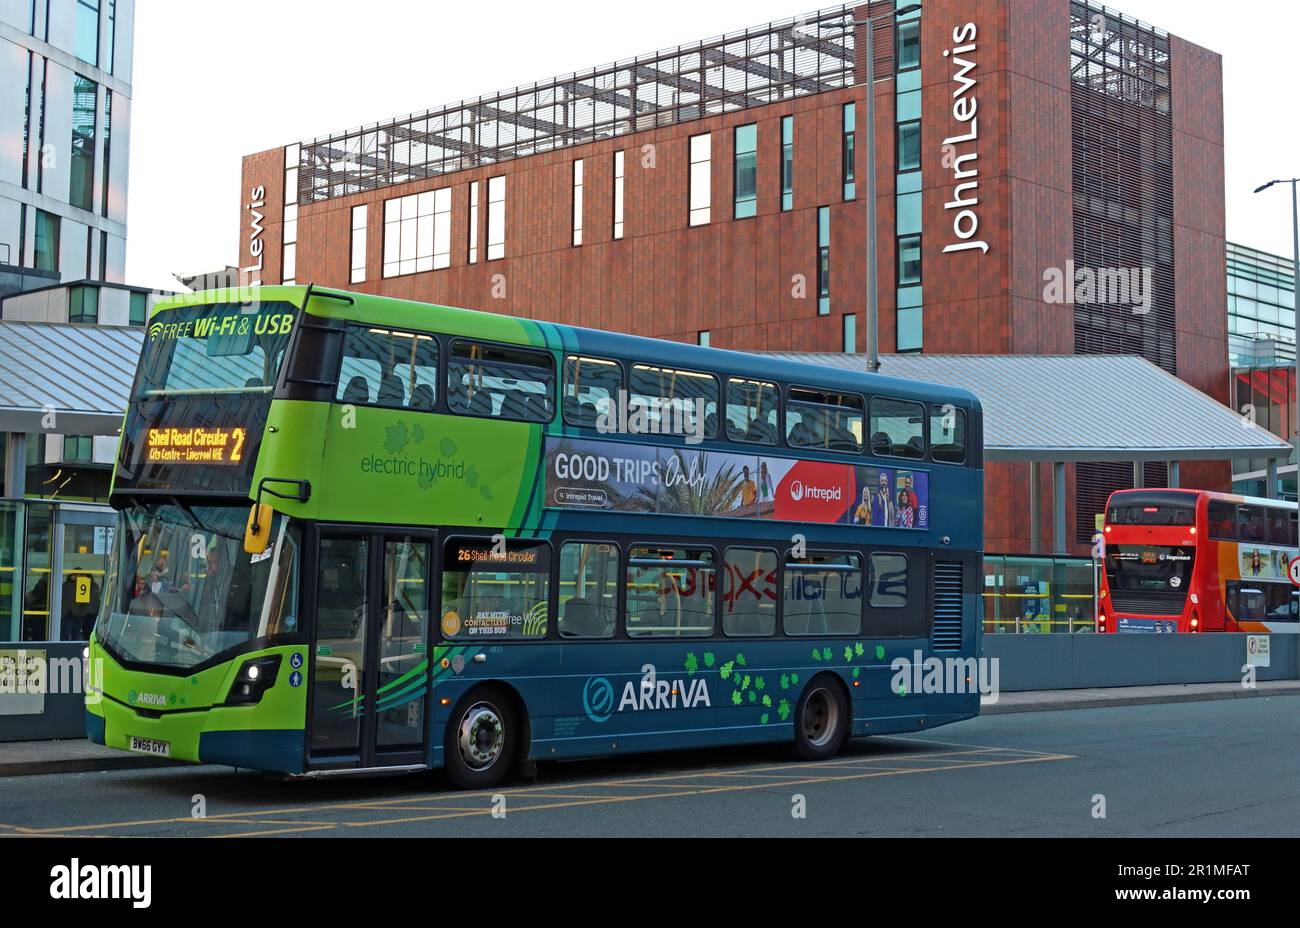 Cleaner, Electric Hybrid, Volvo Arriva bus, at Liverpool One bus station, Paradise Street, Liverpool, Merseyside, England, UK, L1 3EU Stock Photo